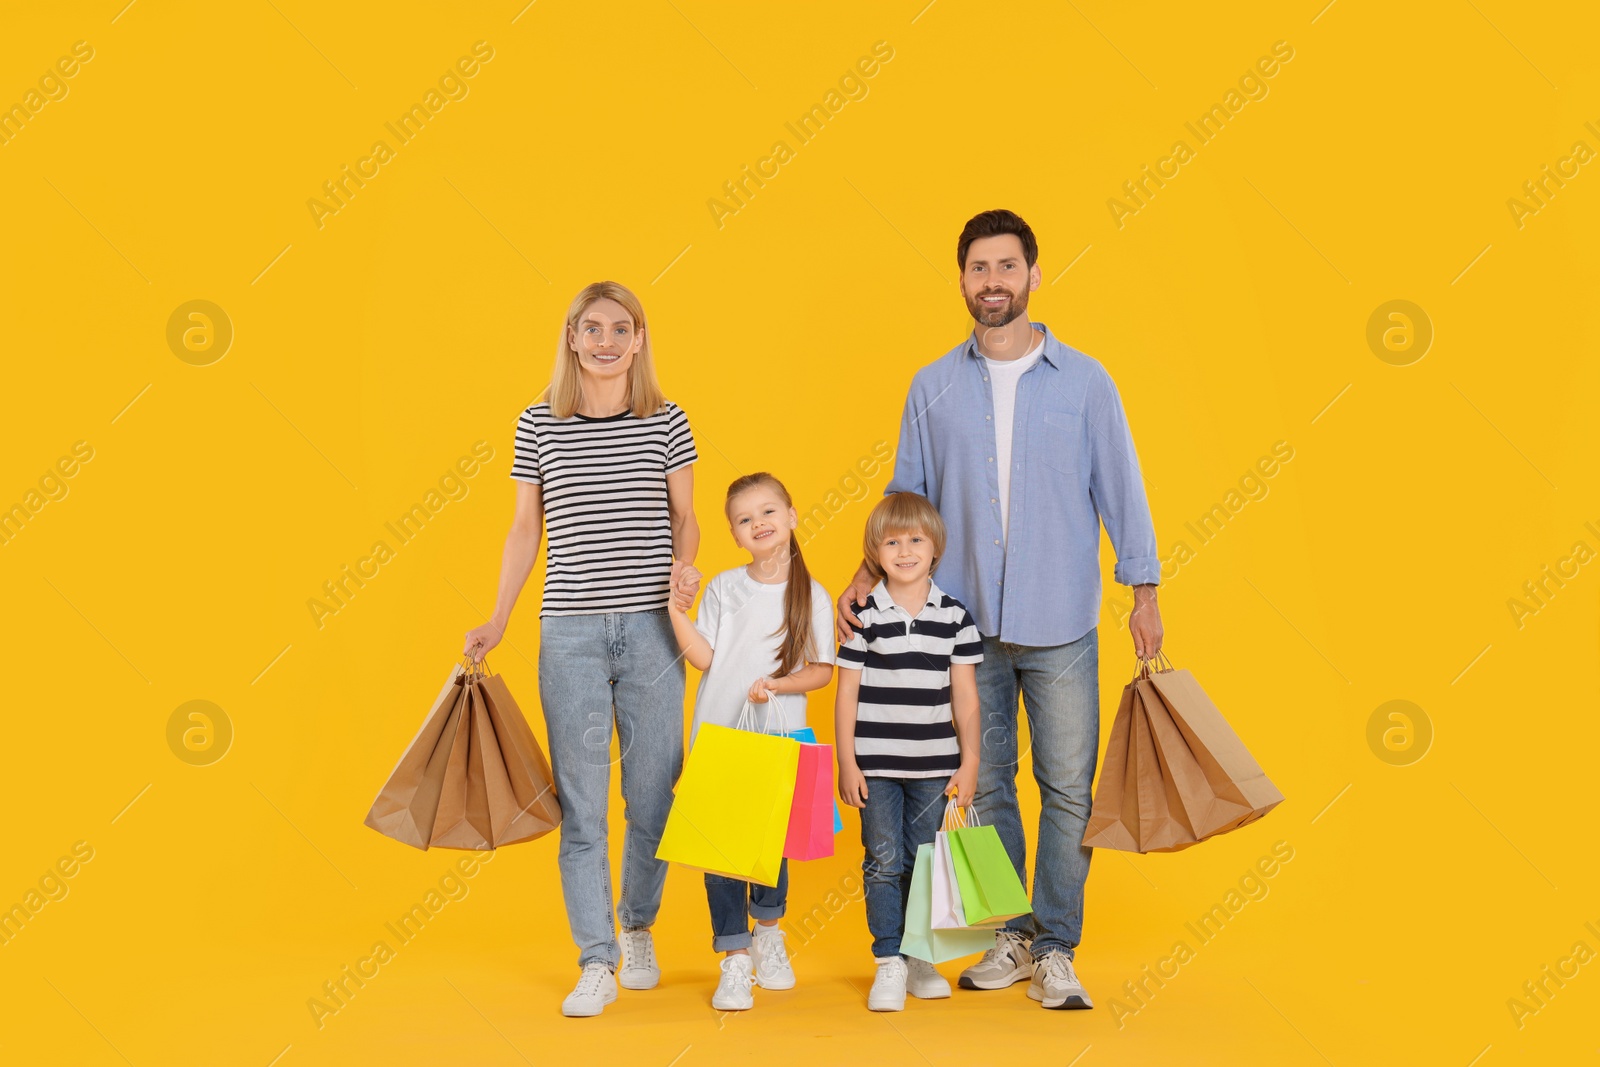 Photo of Family shopping. Happy parents and children with many colorful bags on orange background